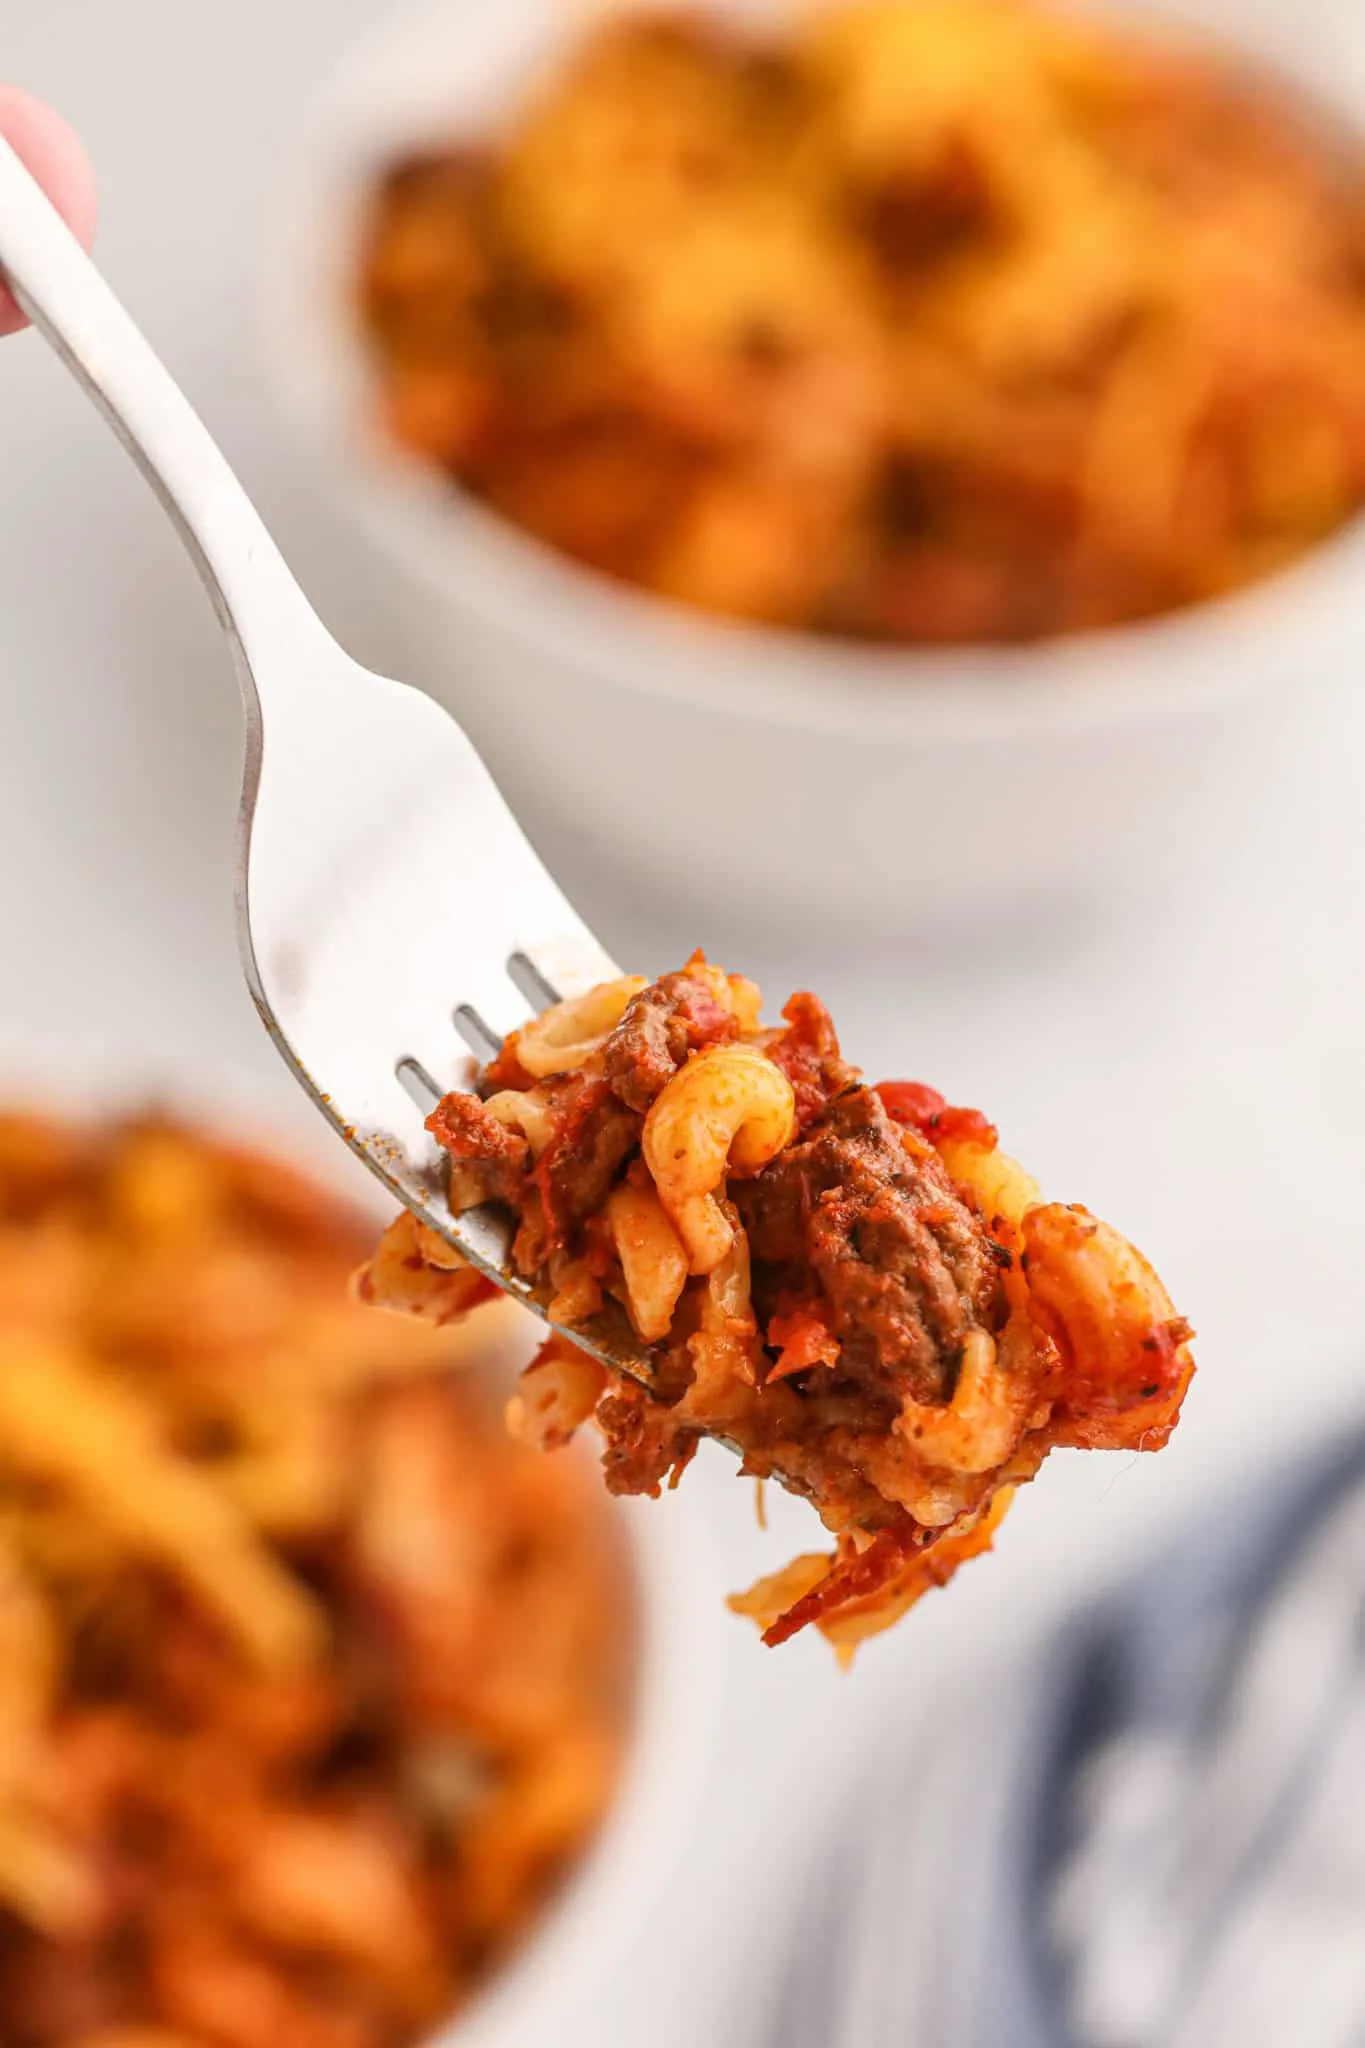 Crock Pot Goulash is an easy slow cooker ground beef and macaroni recipe with a tomato sauce and topped with cheddar cheese.